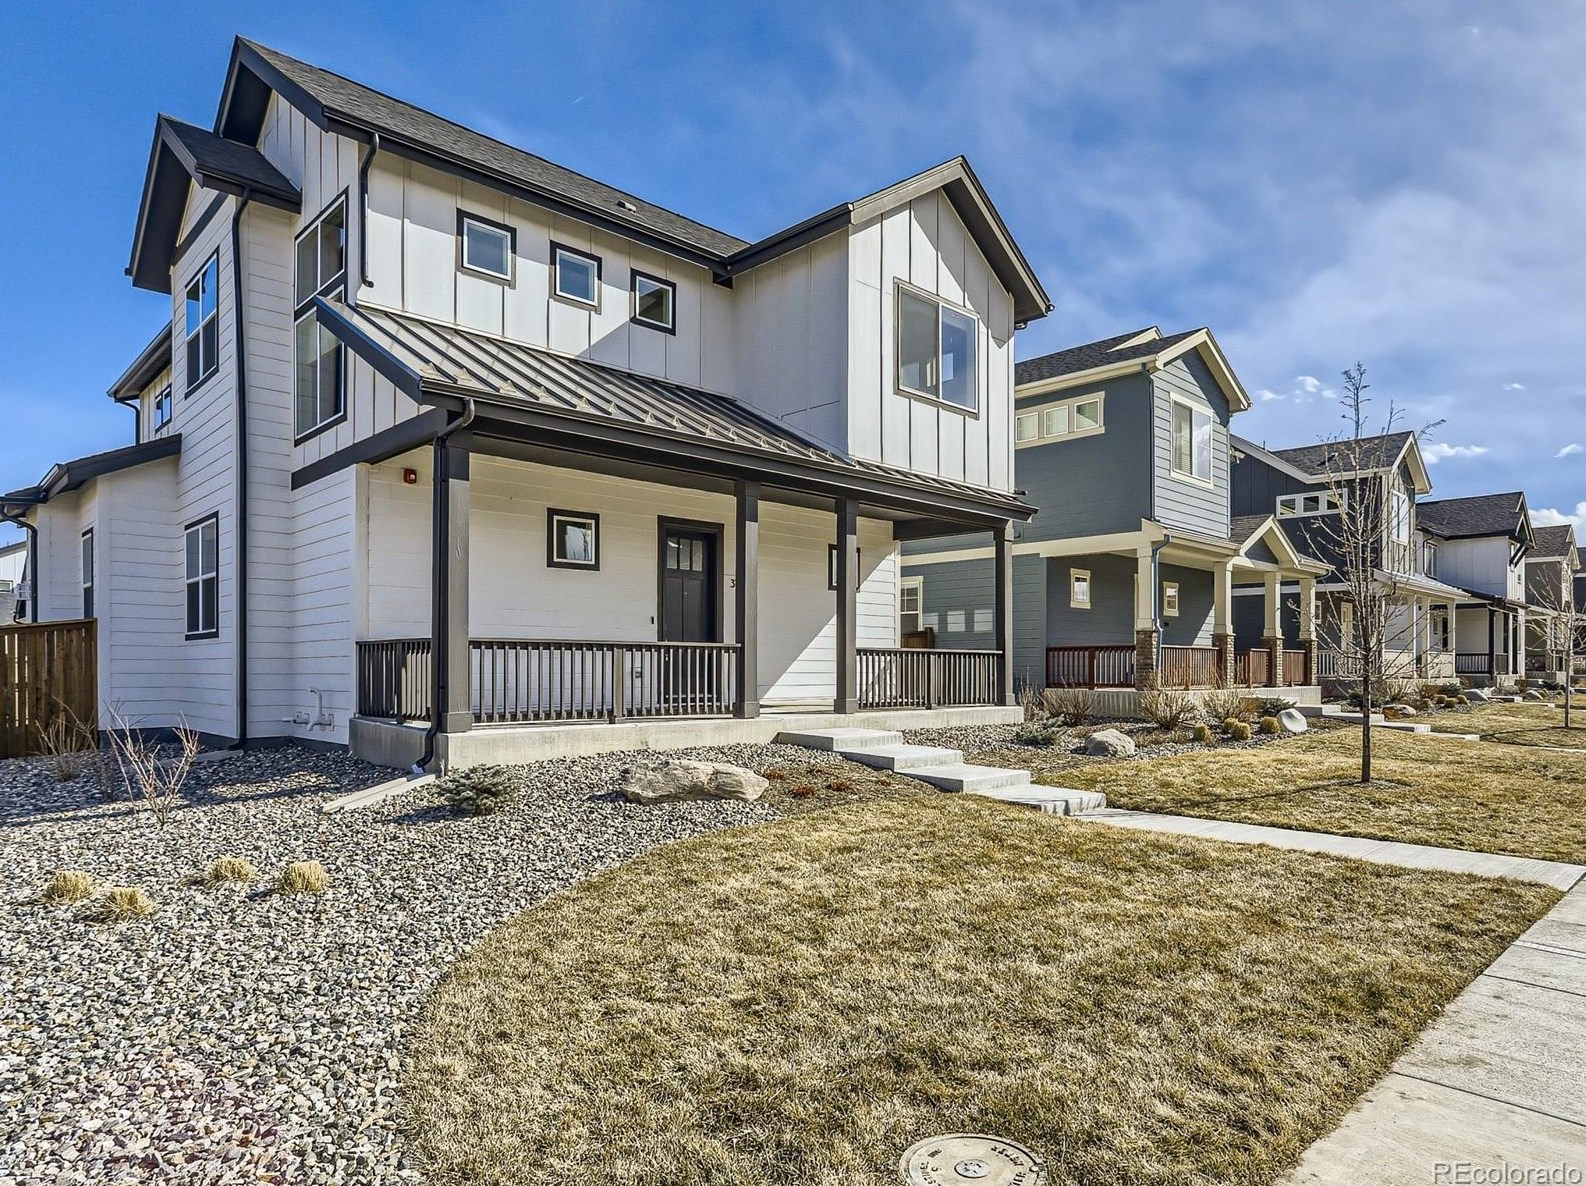 302 S 2nd Ave, Westminster, CO 80027